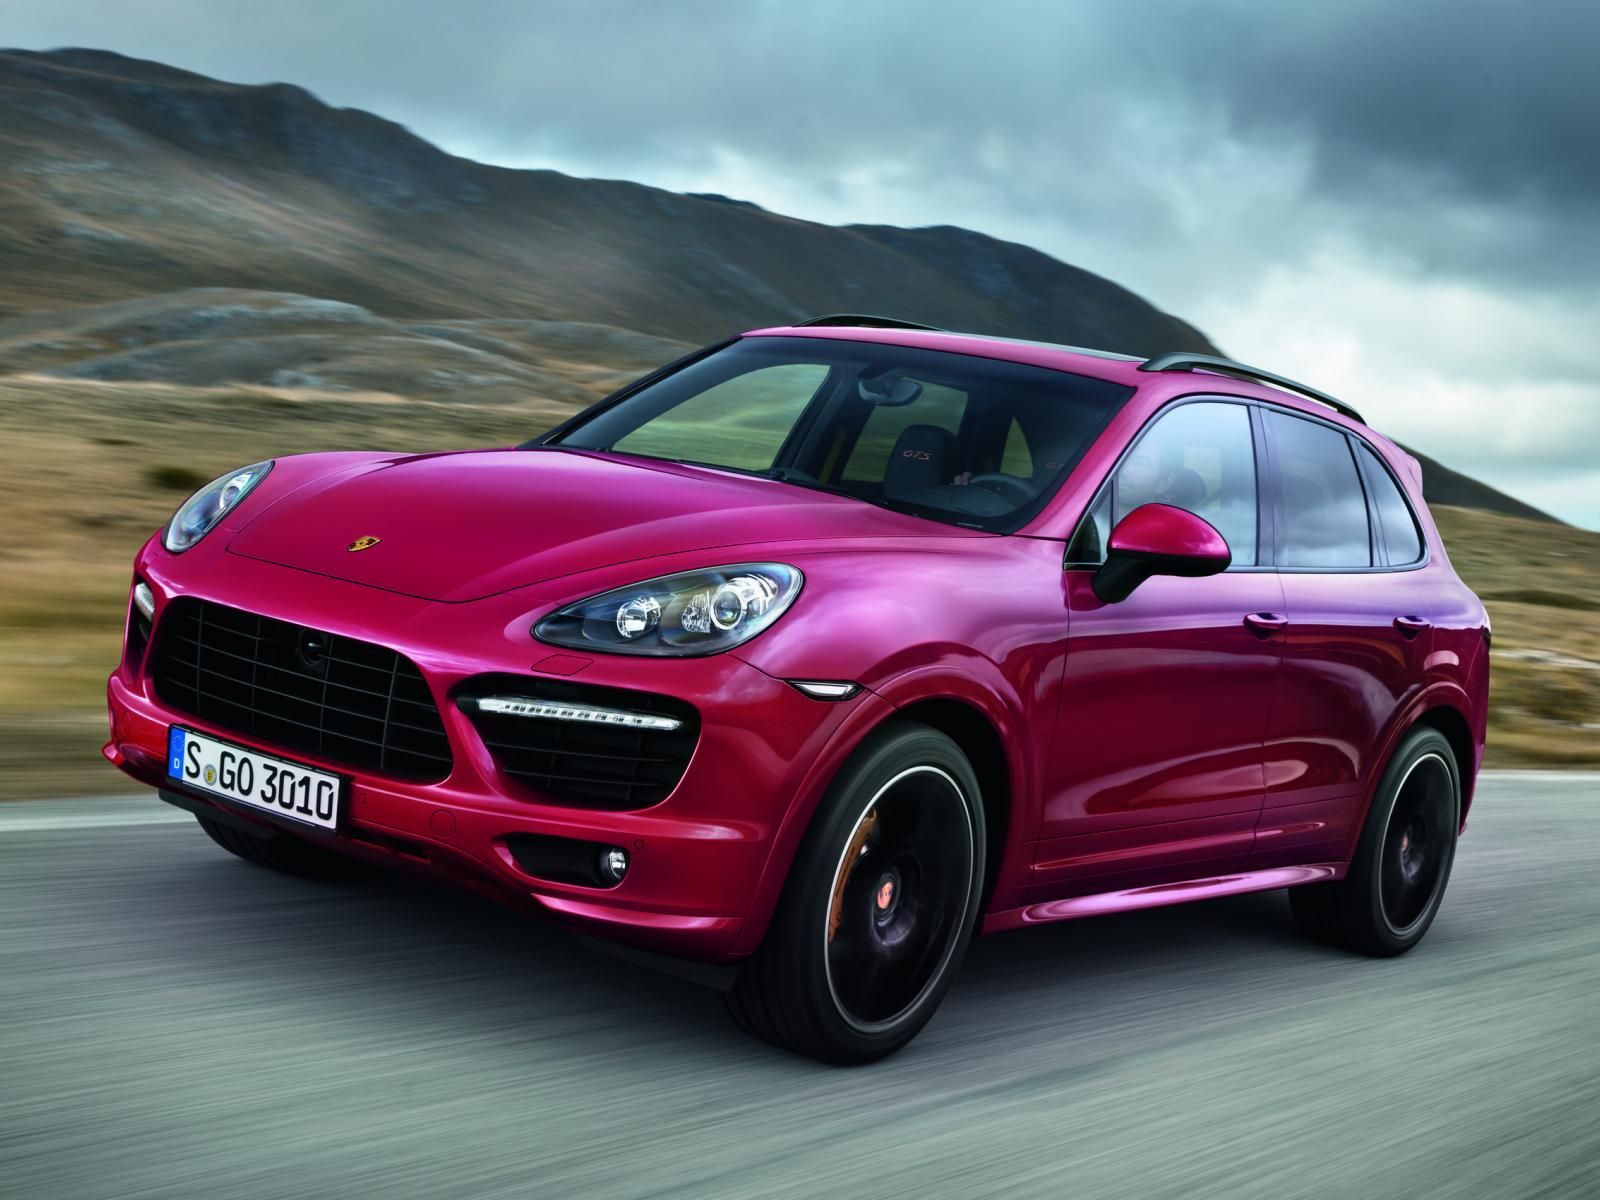 2013 Porsche Cayenne GTS. Finally a cute pink color for once!